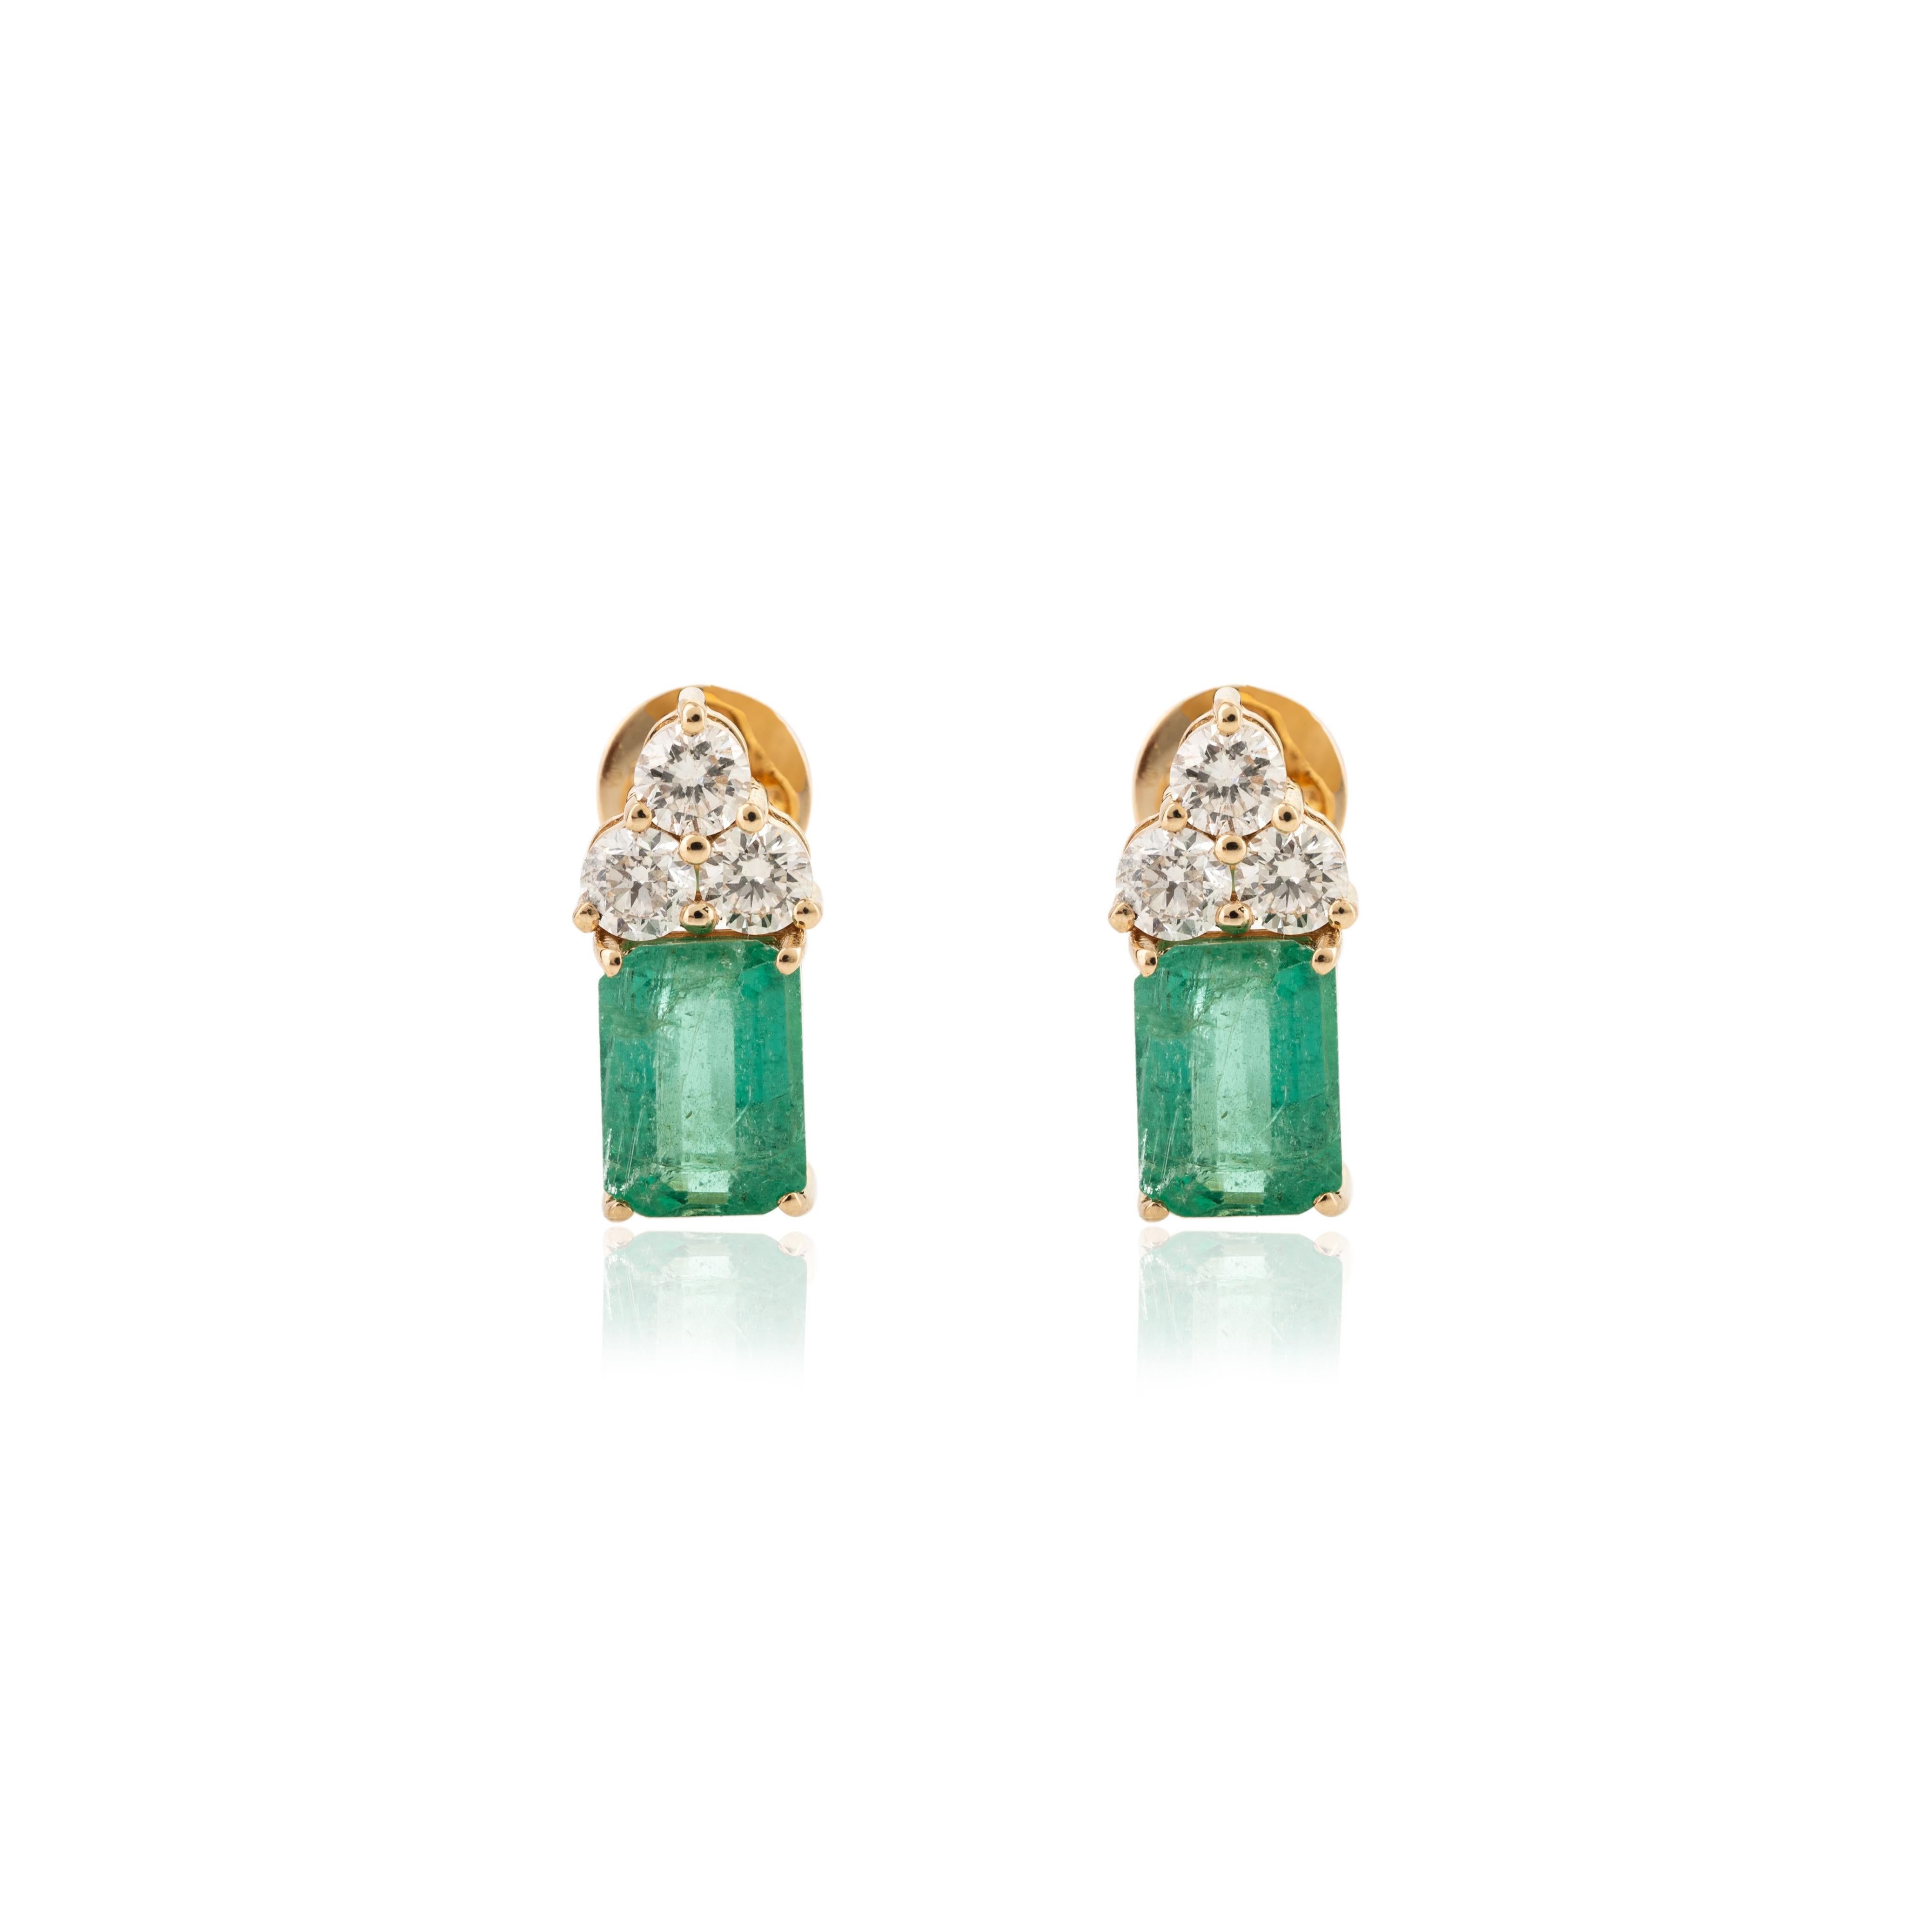 Modern Stunning Diamond and emerald Stud Earrings in 18 Karat Yellow Gold for Her For Sale